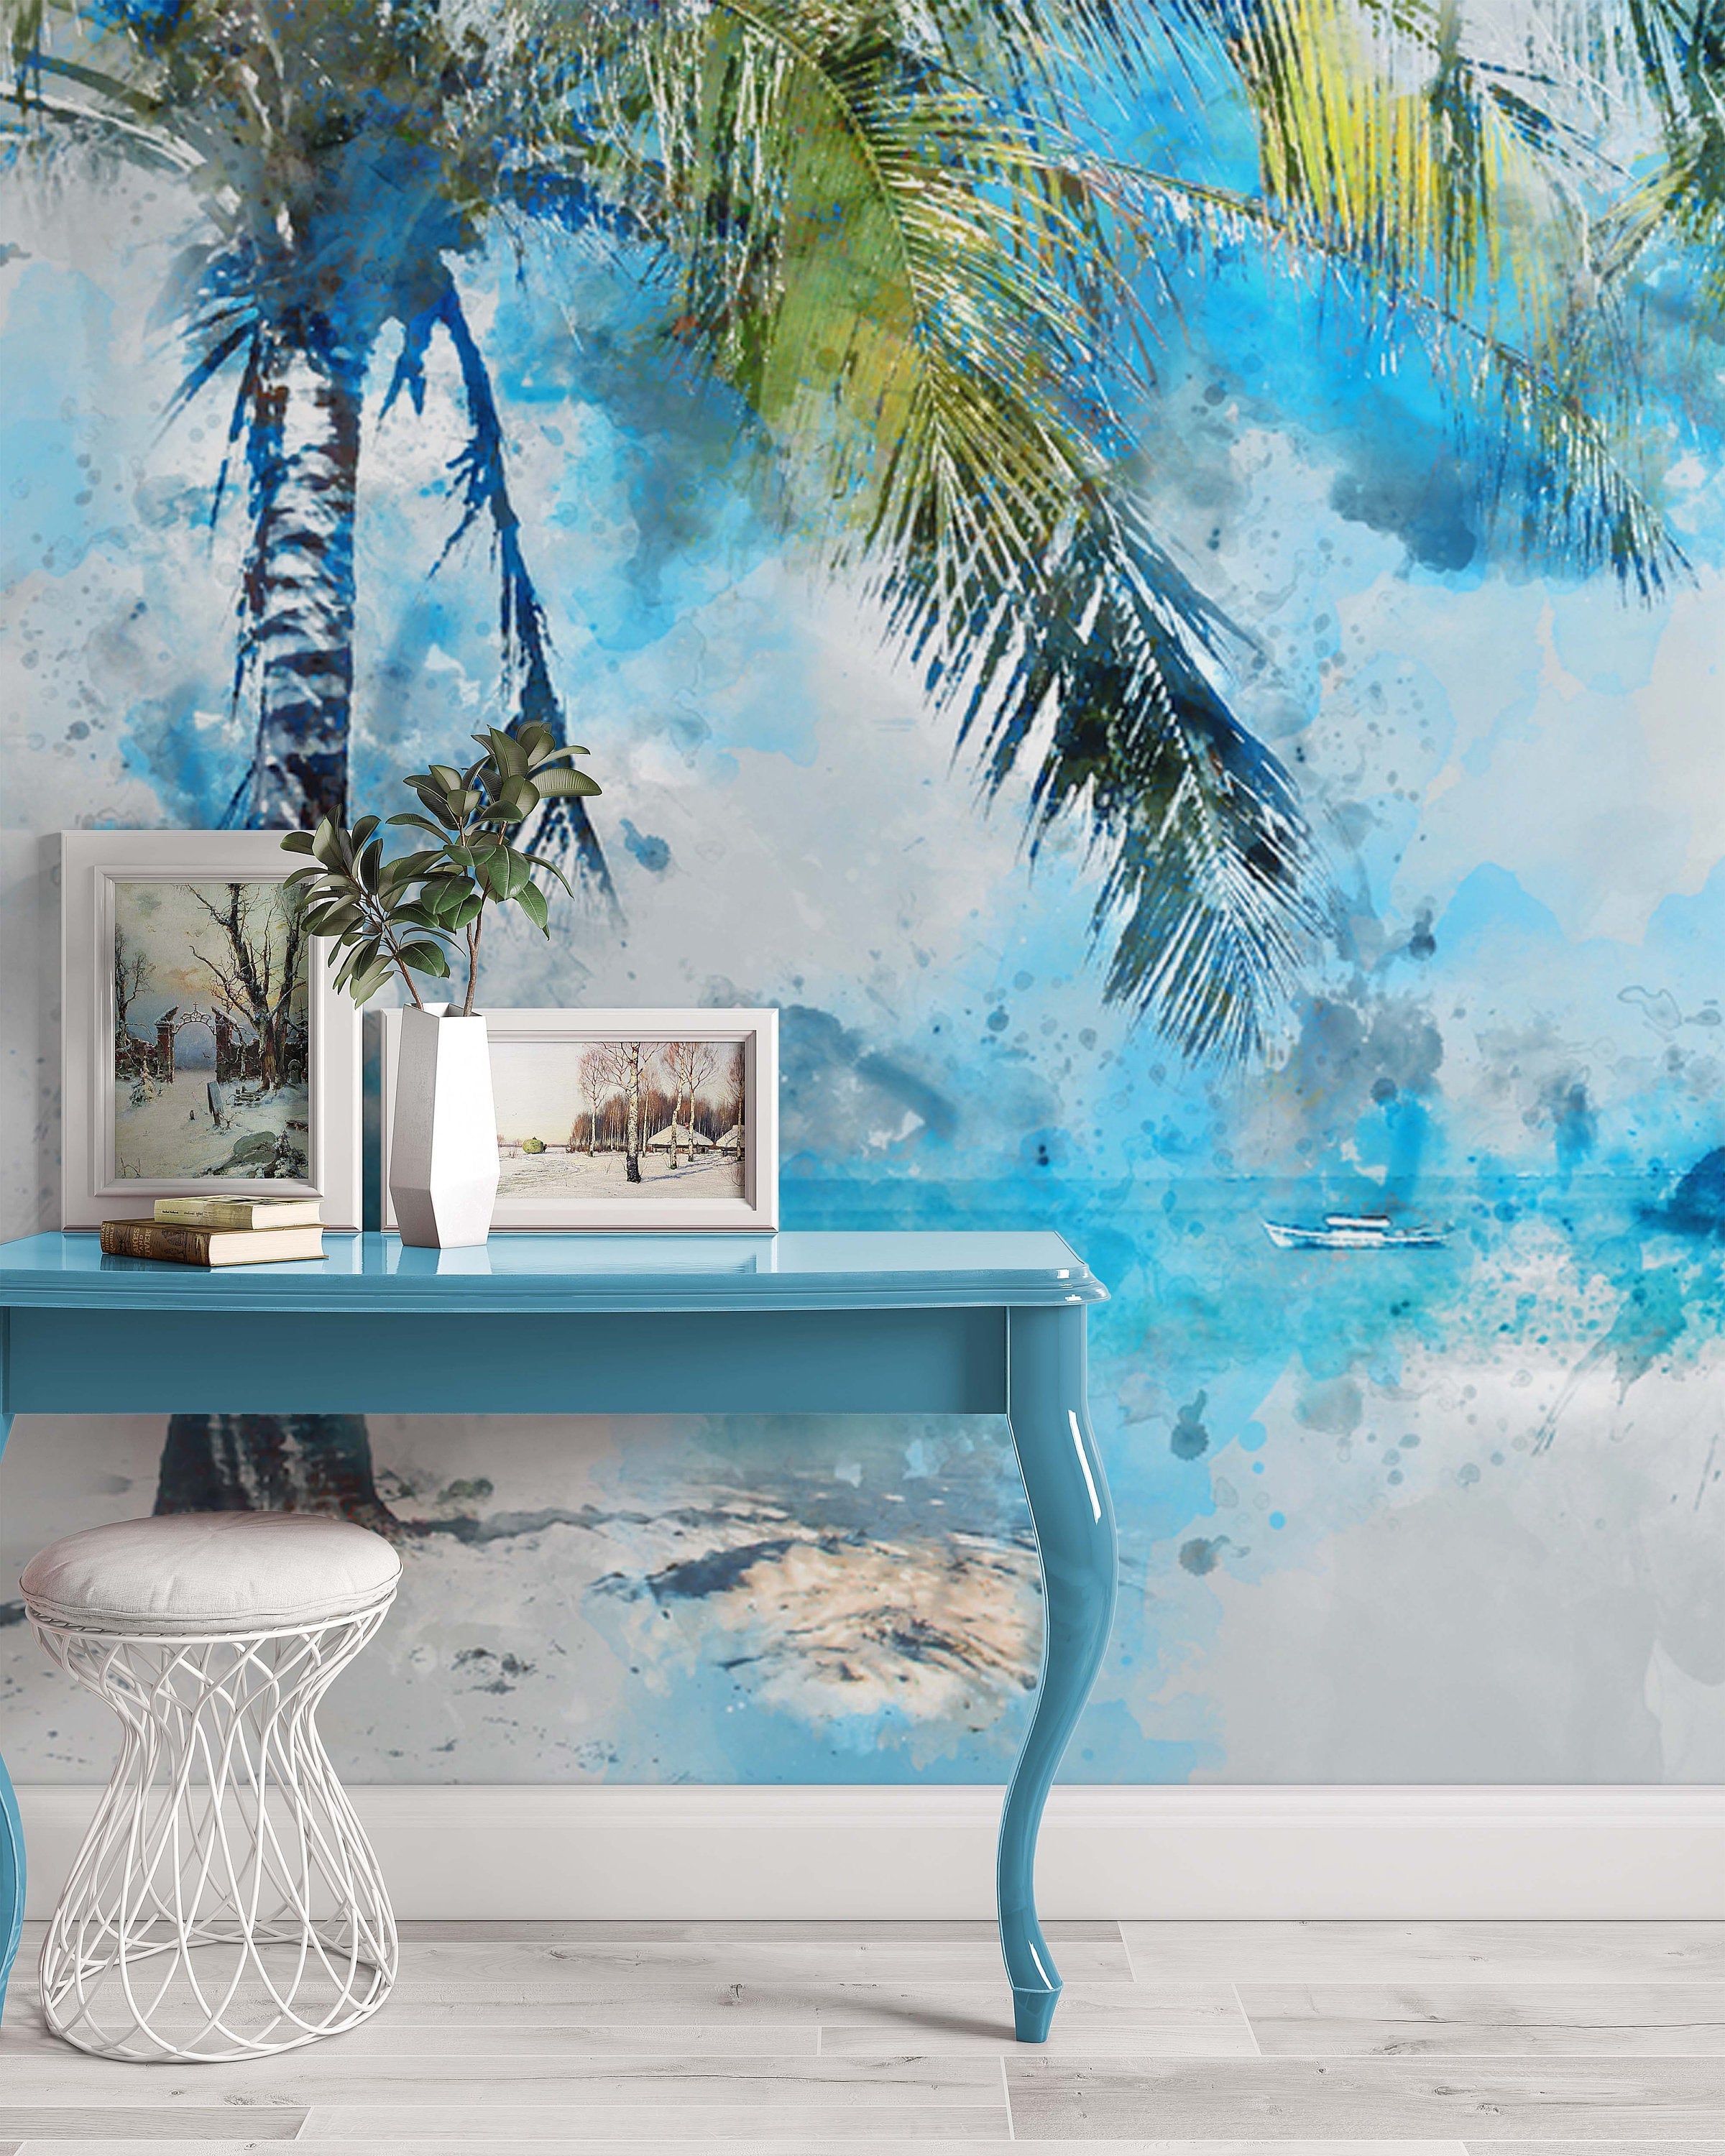 Watercolor Coconut Palm Tree On The Beach Wallpaper Kitchen Bedroom Living Room Office Mural Home Decor Wall Art